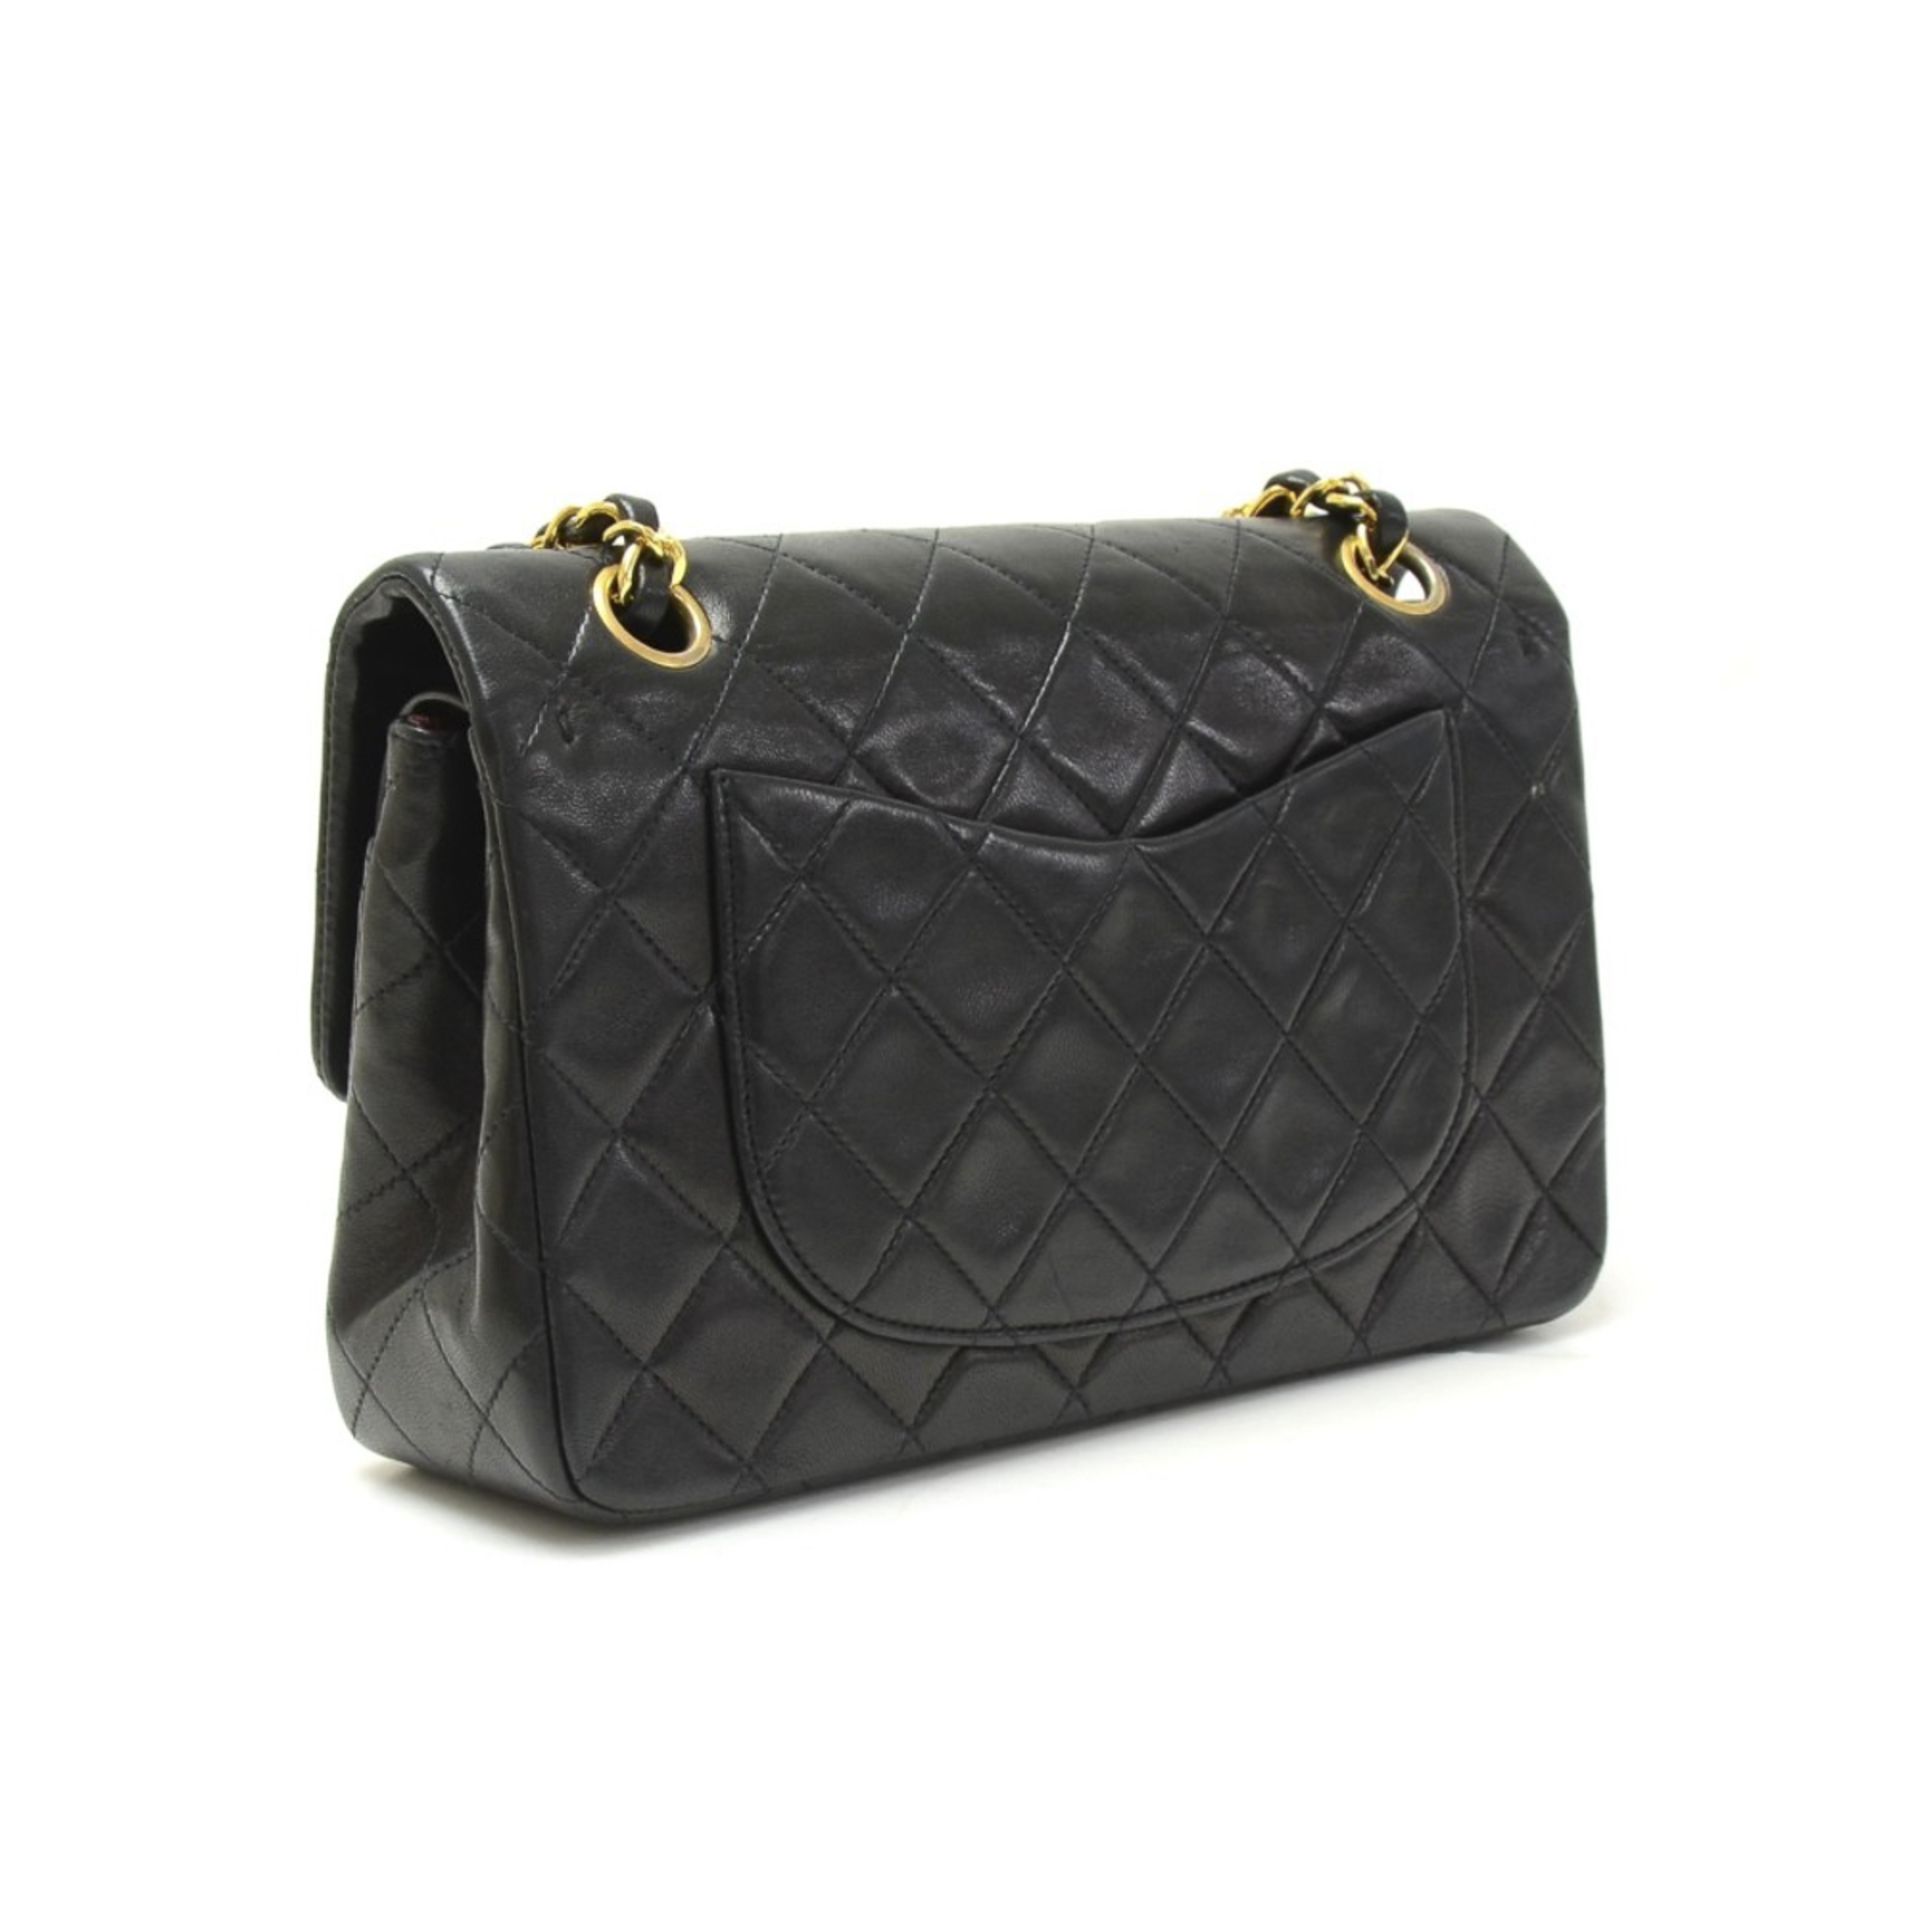 Chanel, Small Classic Double Flap Bag - Image 4 of 10